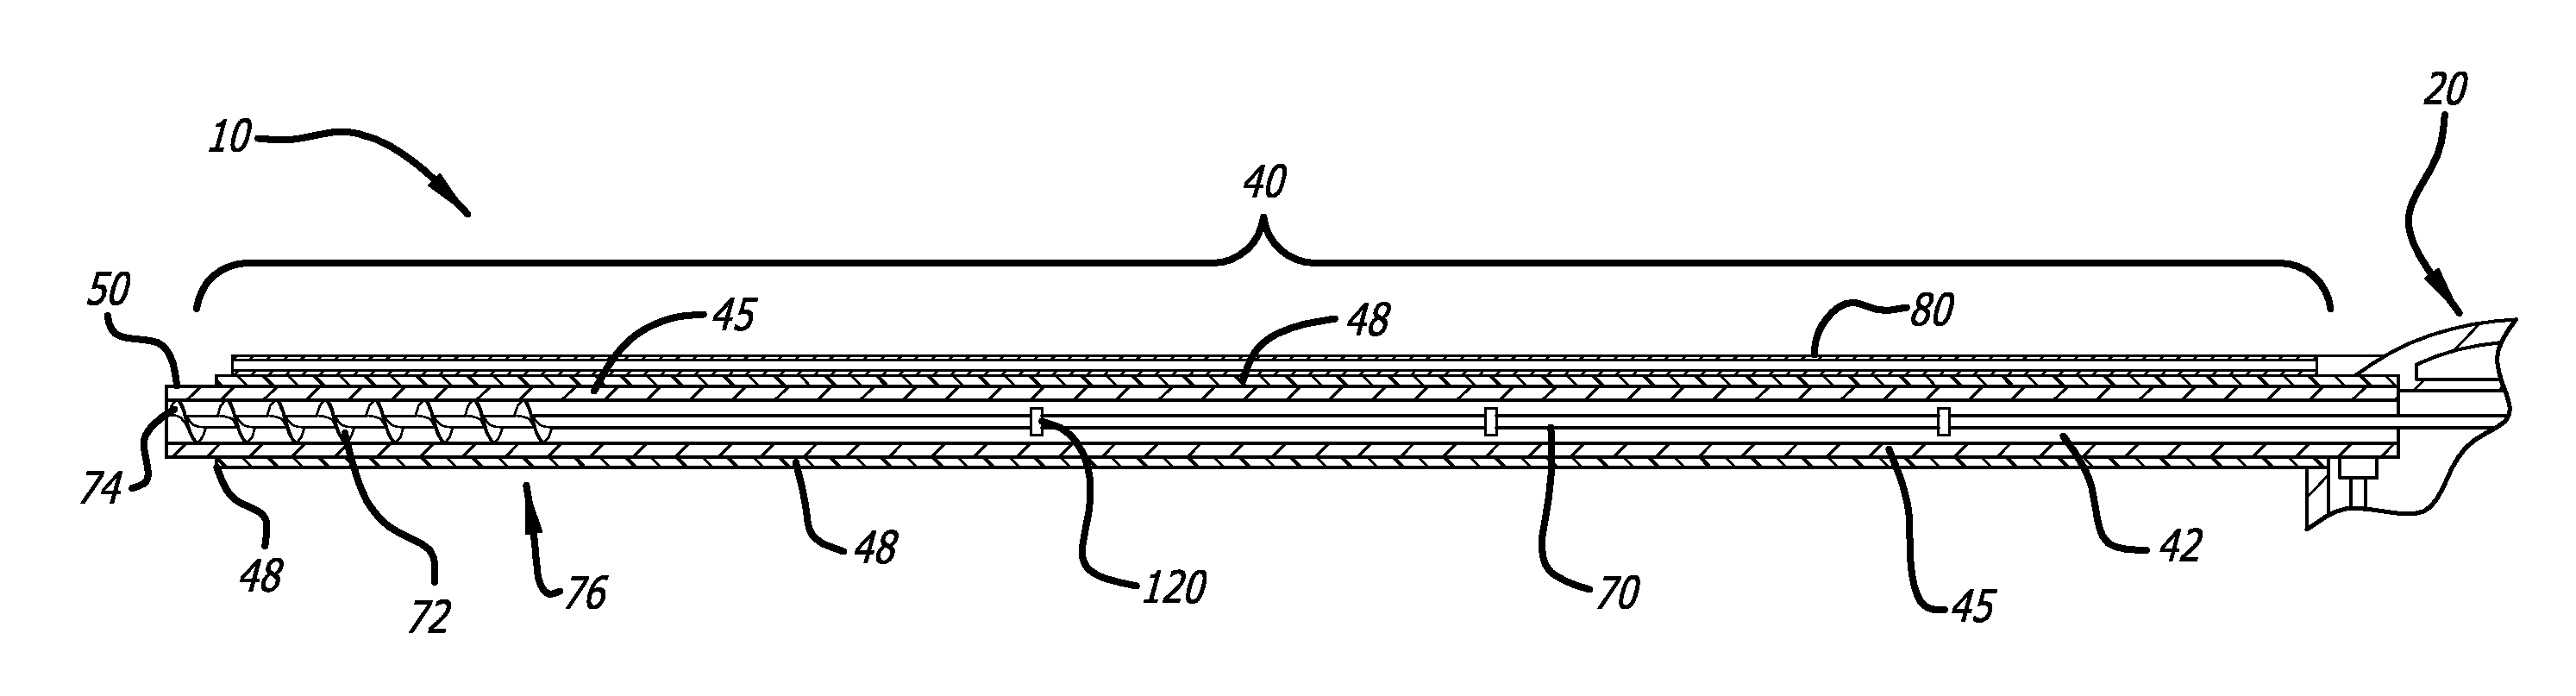 Suction electrocautery device having controlled irrigation and rotating auger